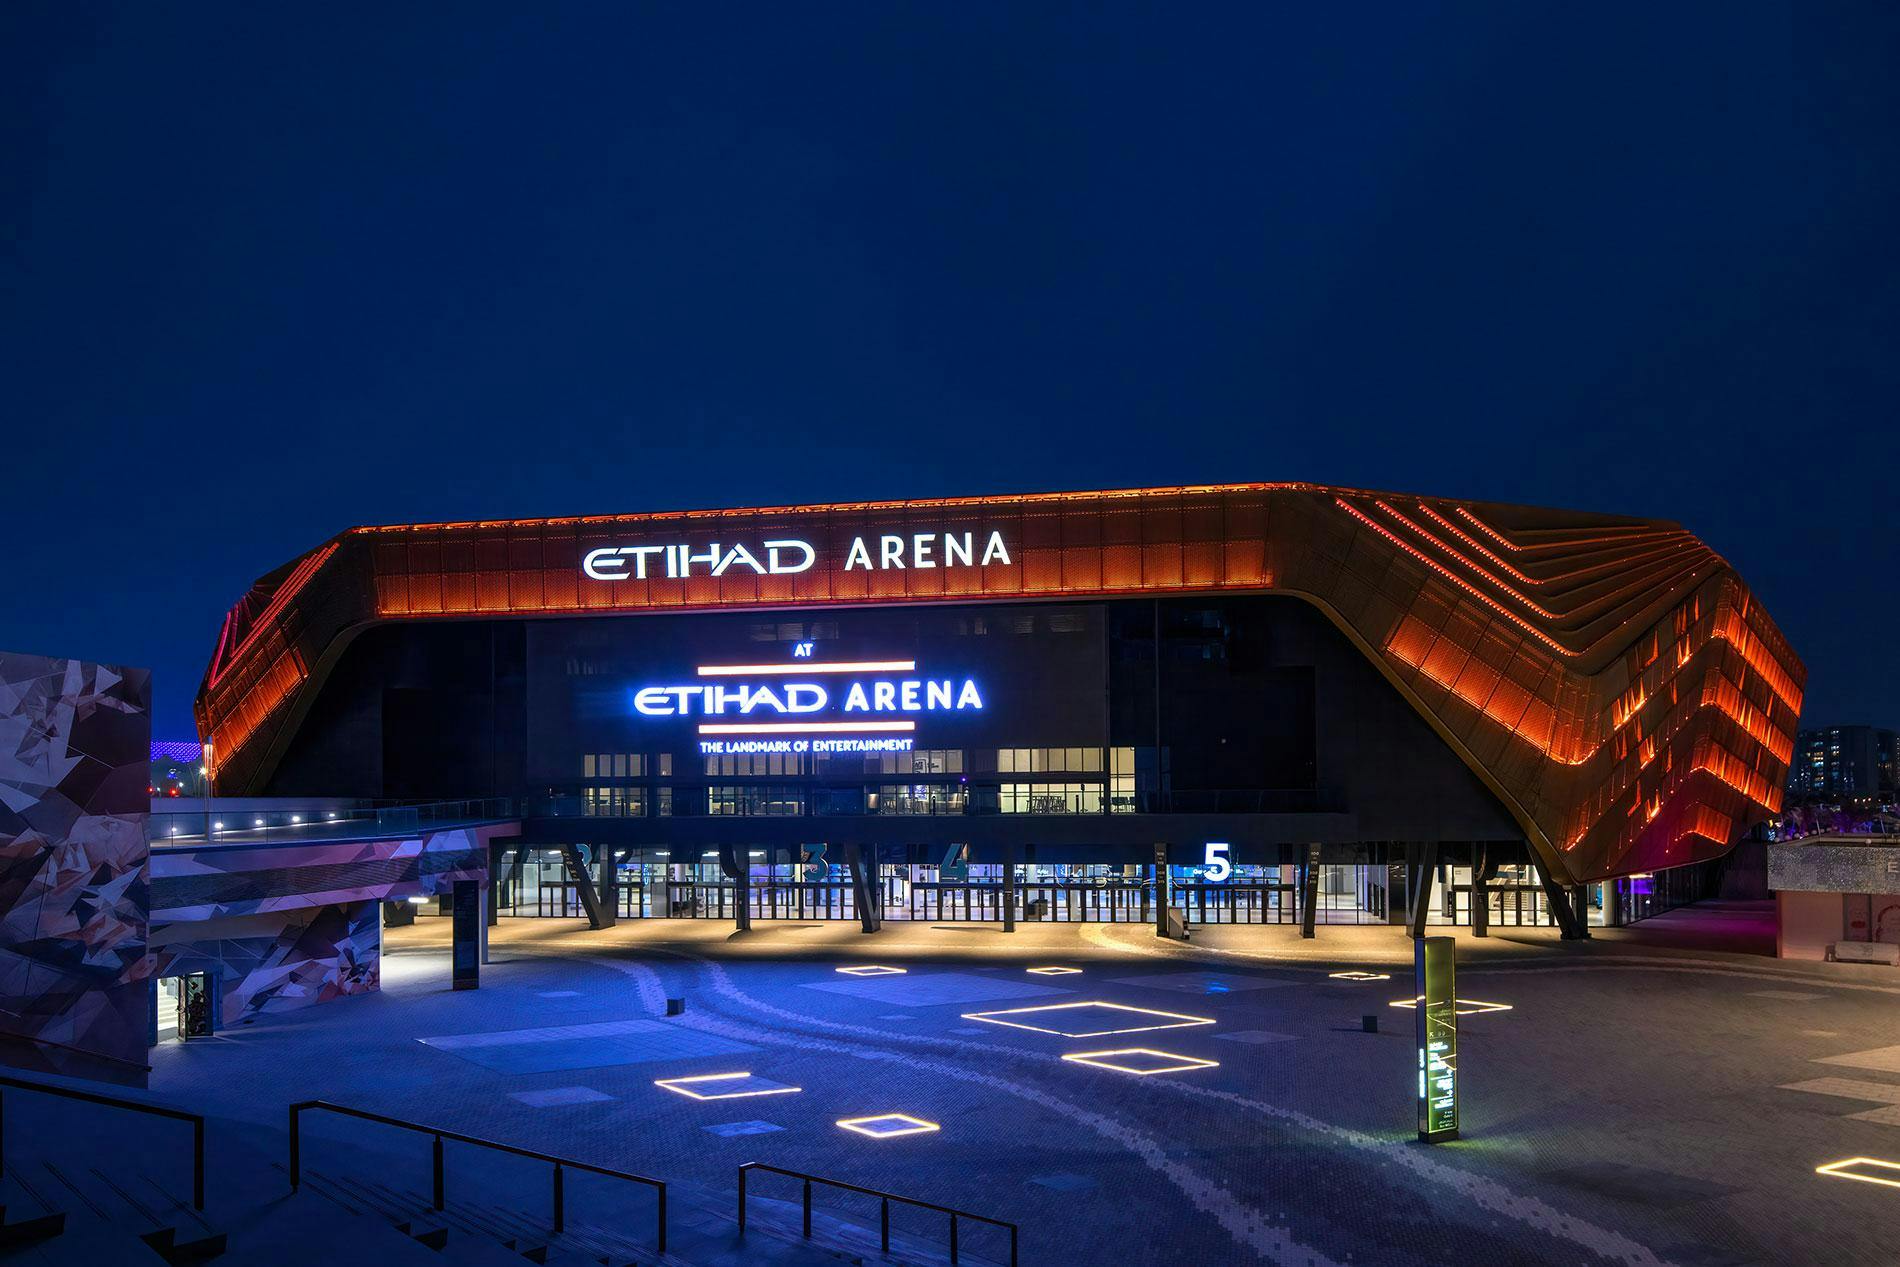 The BLAST Premier World Final playoffs will be hosted at the Etihad Arena in Abu Dhabi. 